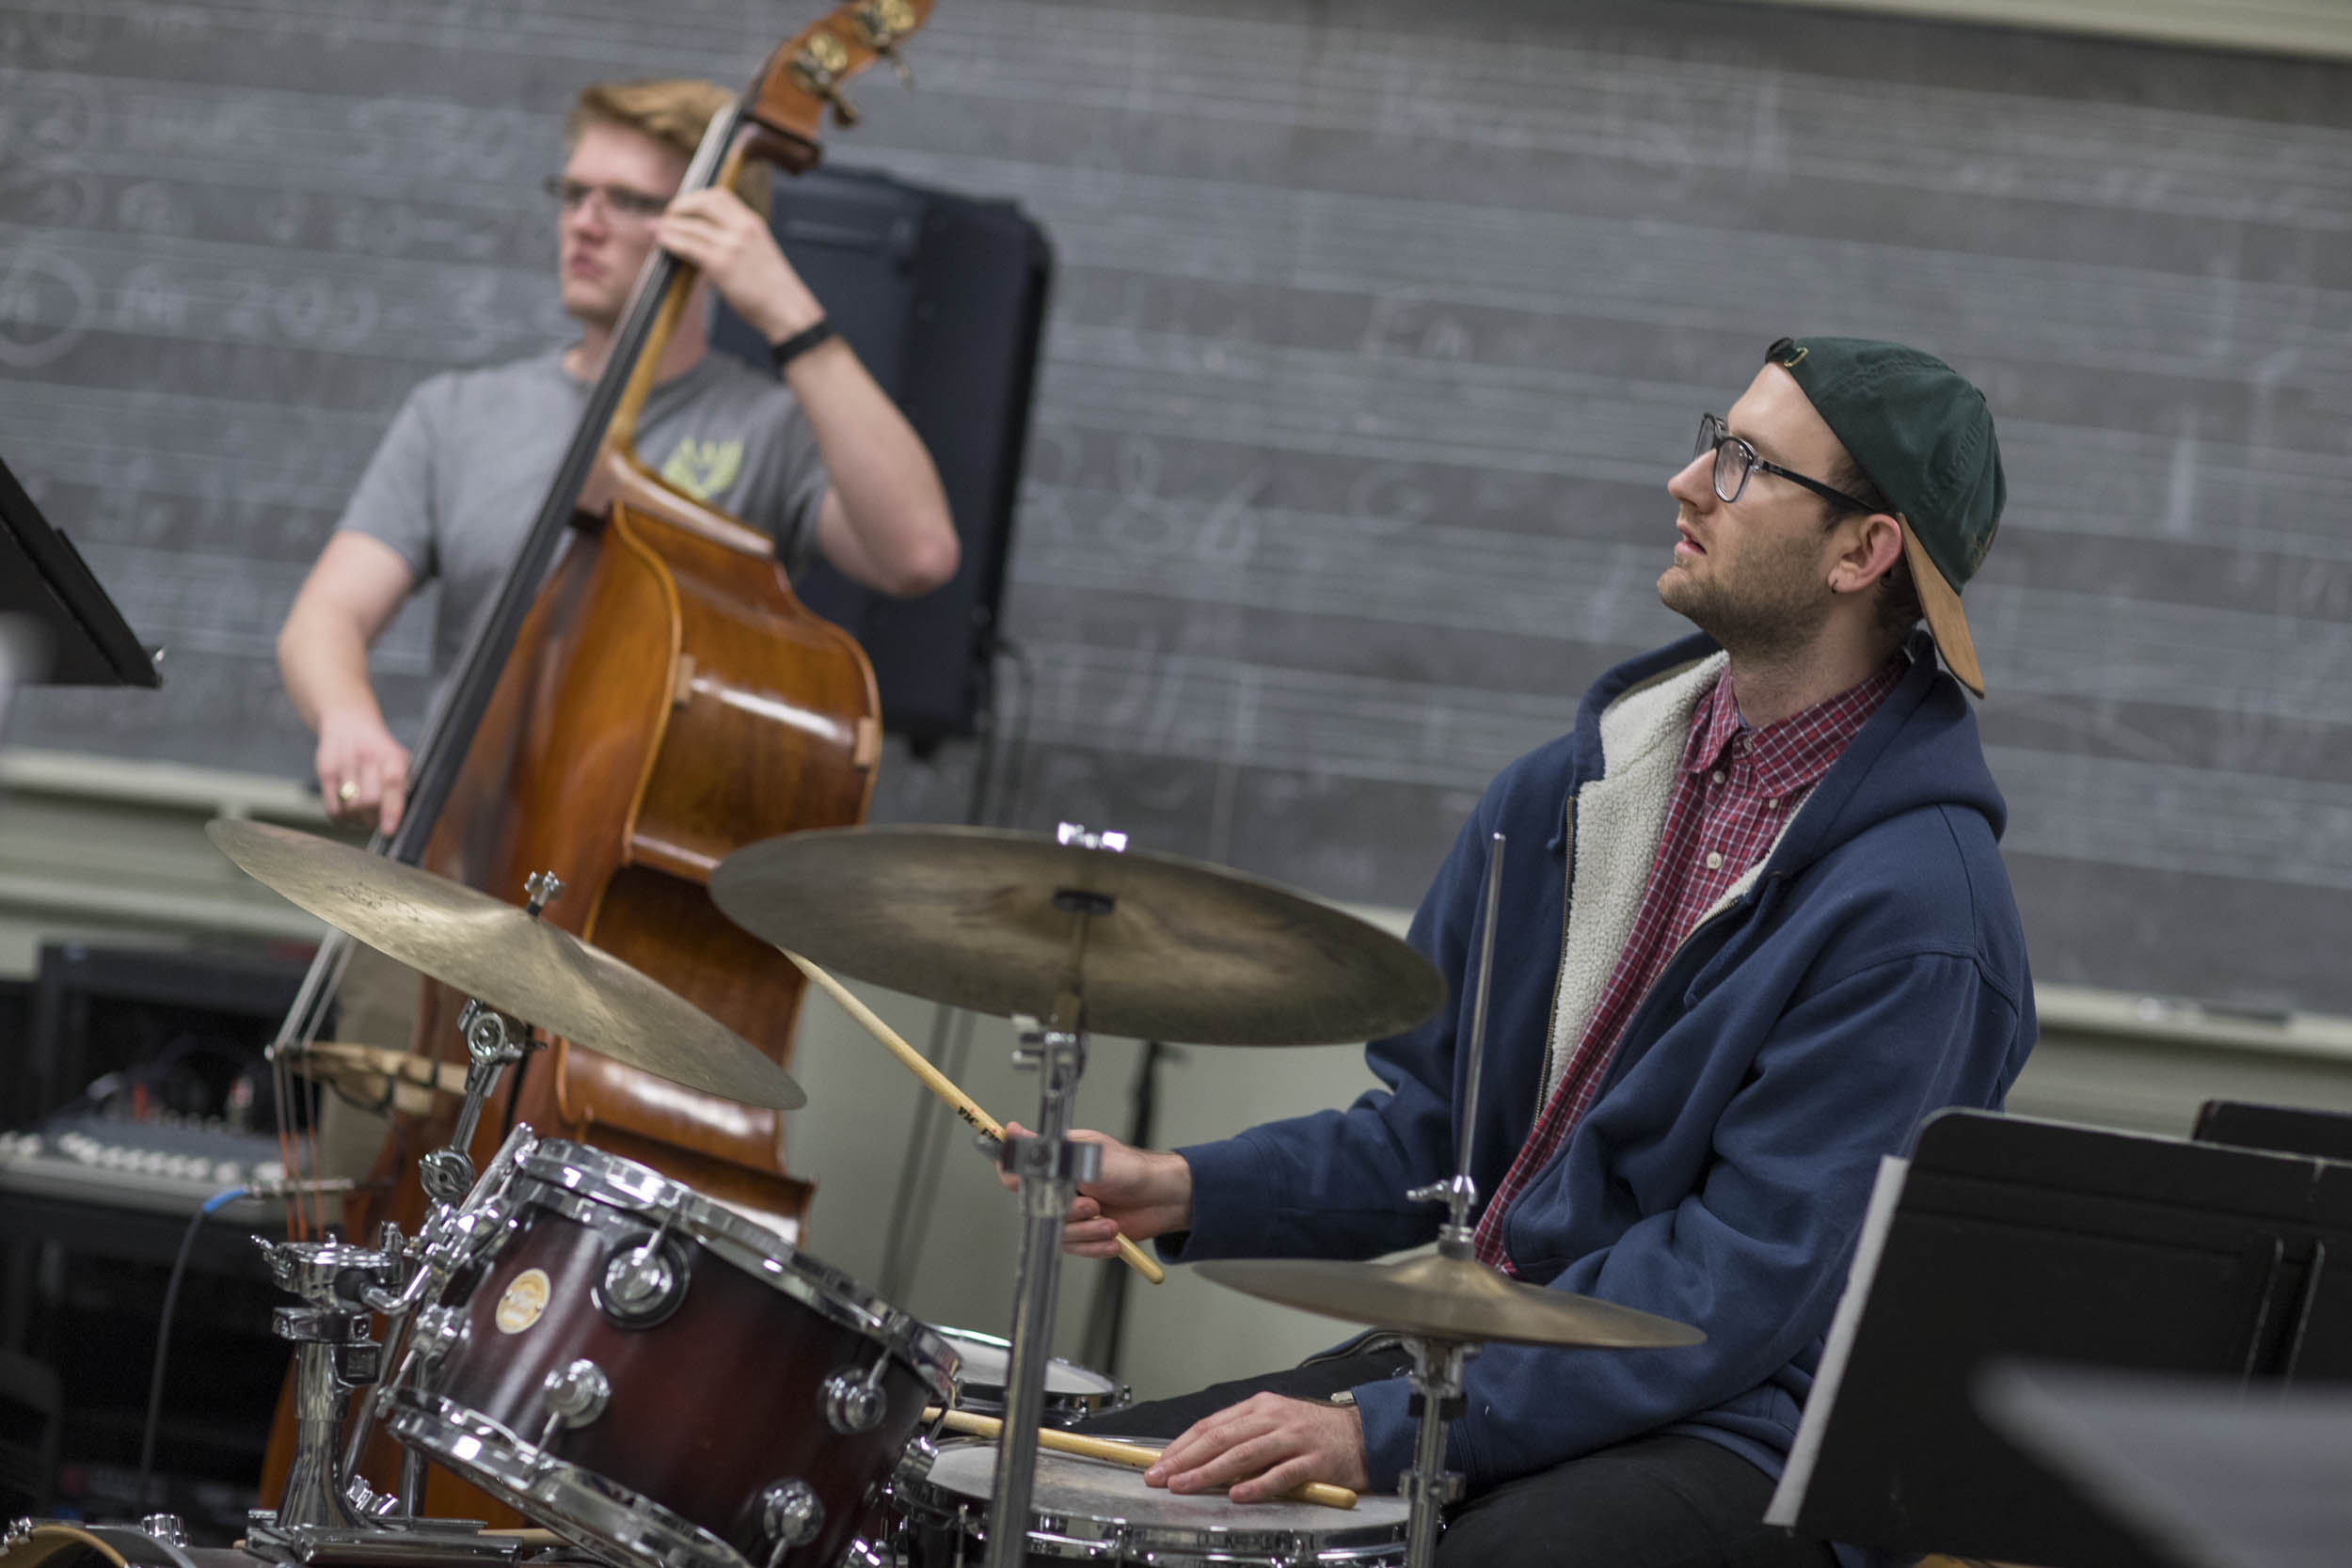 Students in the UVA Jazz Ensemble rehearsed in Old Cabell Hall on Thursday night. (Photos by Sanjay Suchak, University Communications)